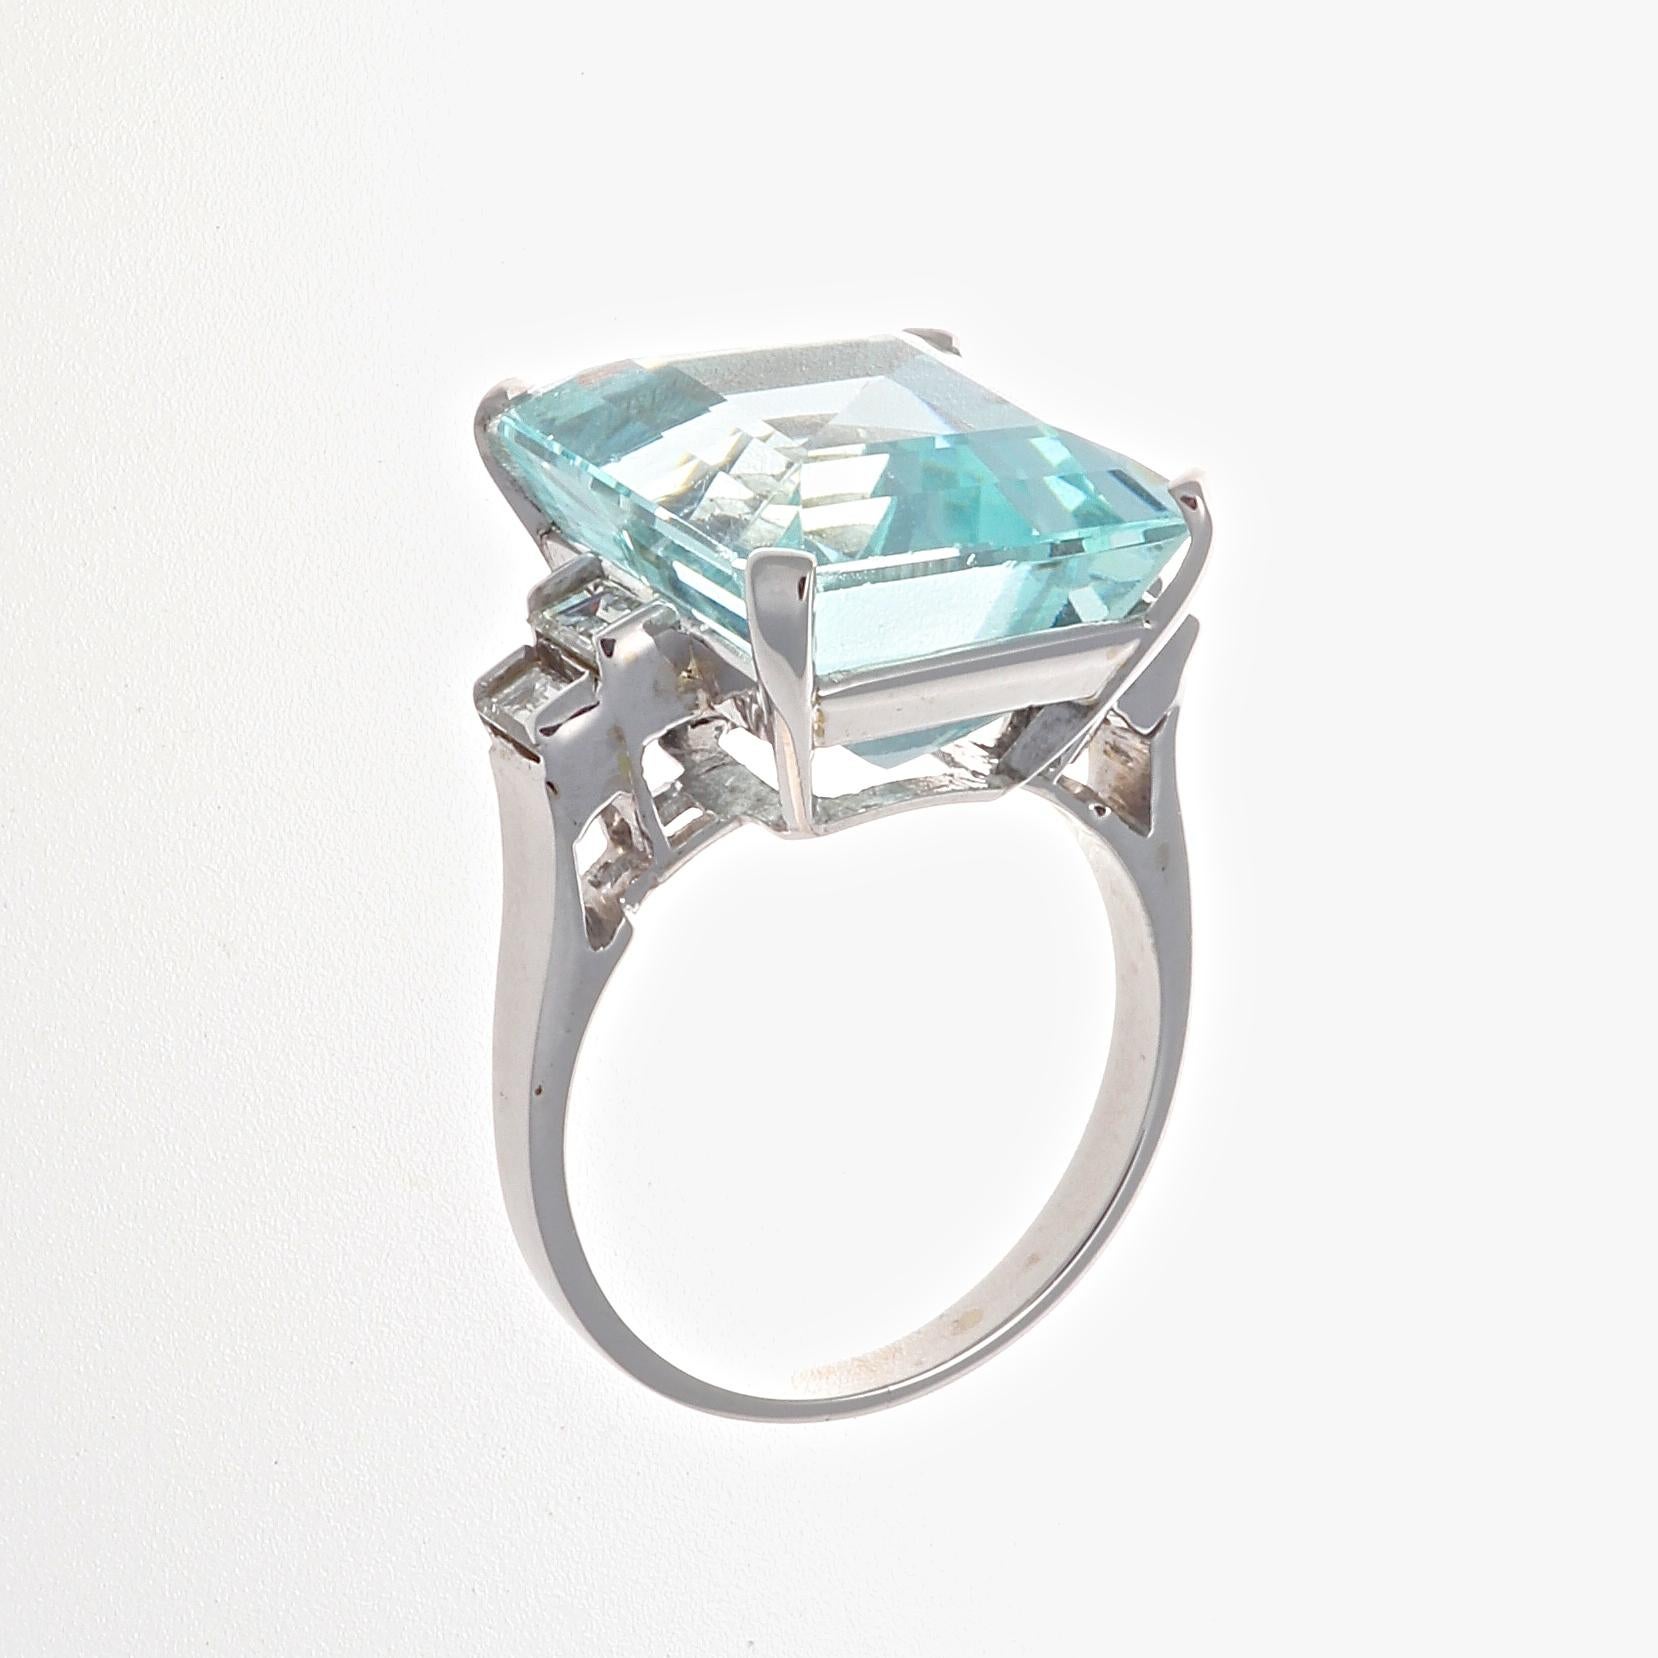 Serene, fresh and sparkling like the ocean. Believed to be the treasure of mermaids and the stone of eternal youth. Featuring an approximately 15 carat aquamarine accented by  emerald cut diamonds on either side. Crafted in 18k white gold. Ring size